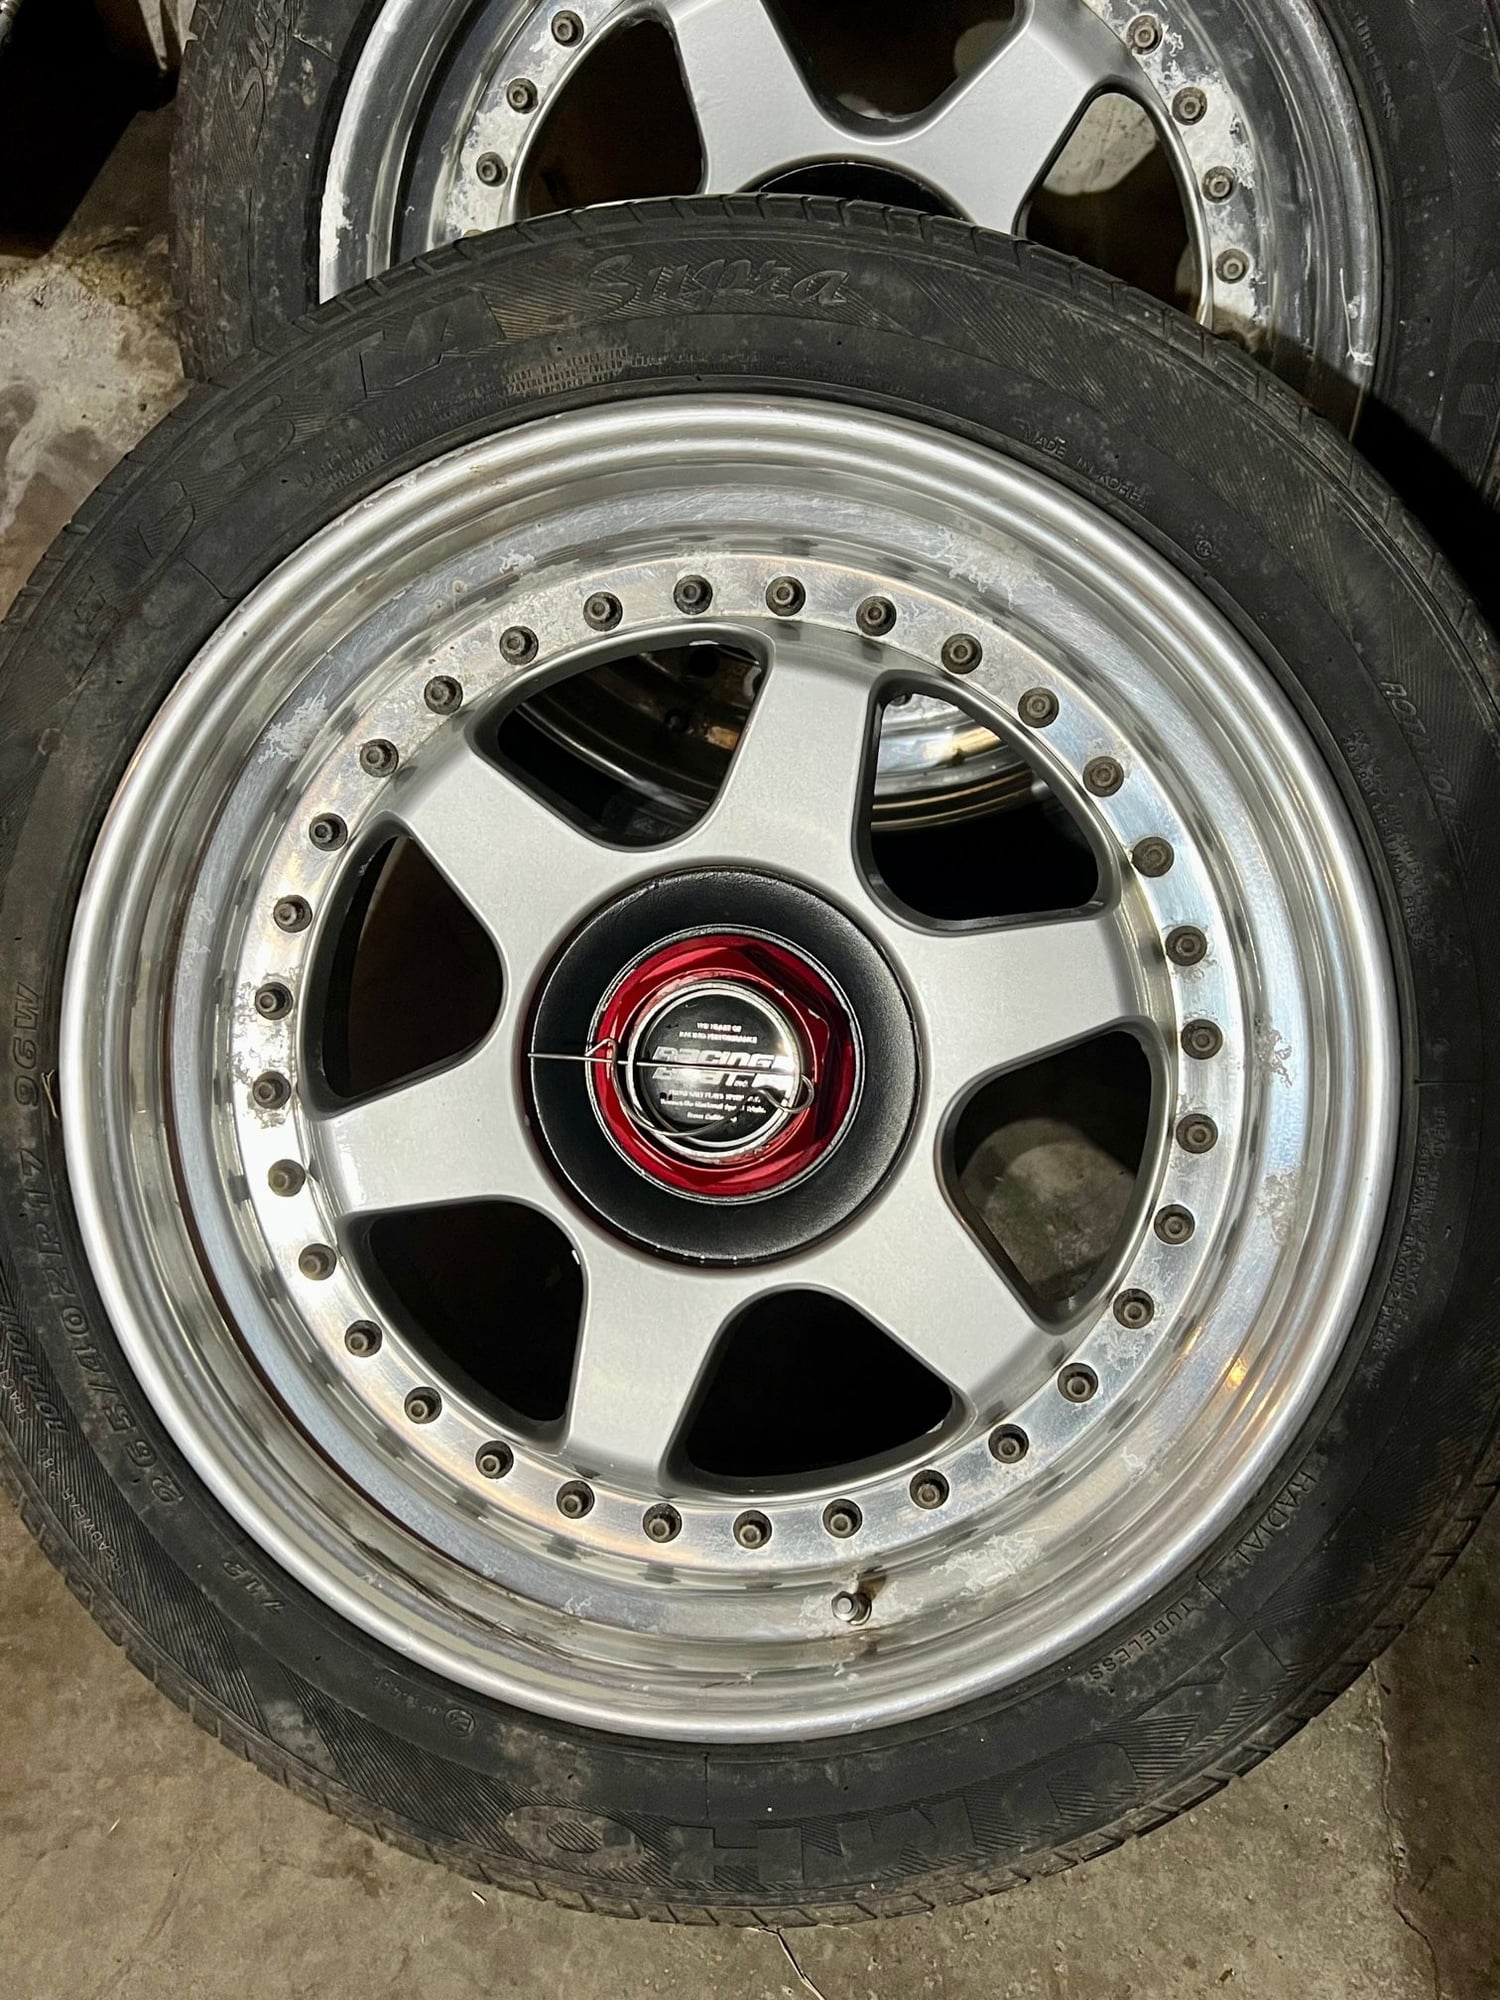 Wheels and Tires/Axles - 17" Racing Beat 3 Piece Wheels - Rare! - Used - 1986 to 2002 Mazda RX-7 - Middletown, NY 10940, United States